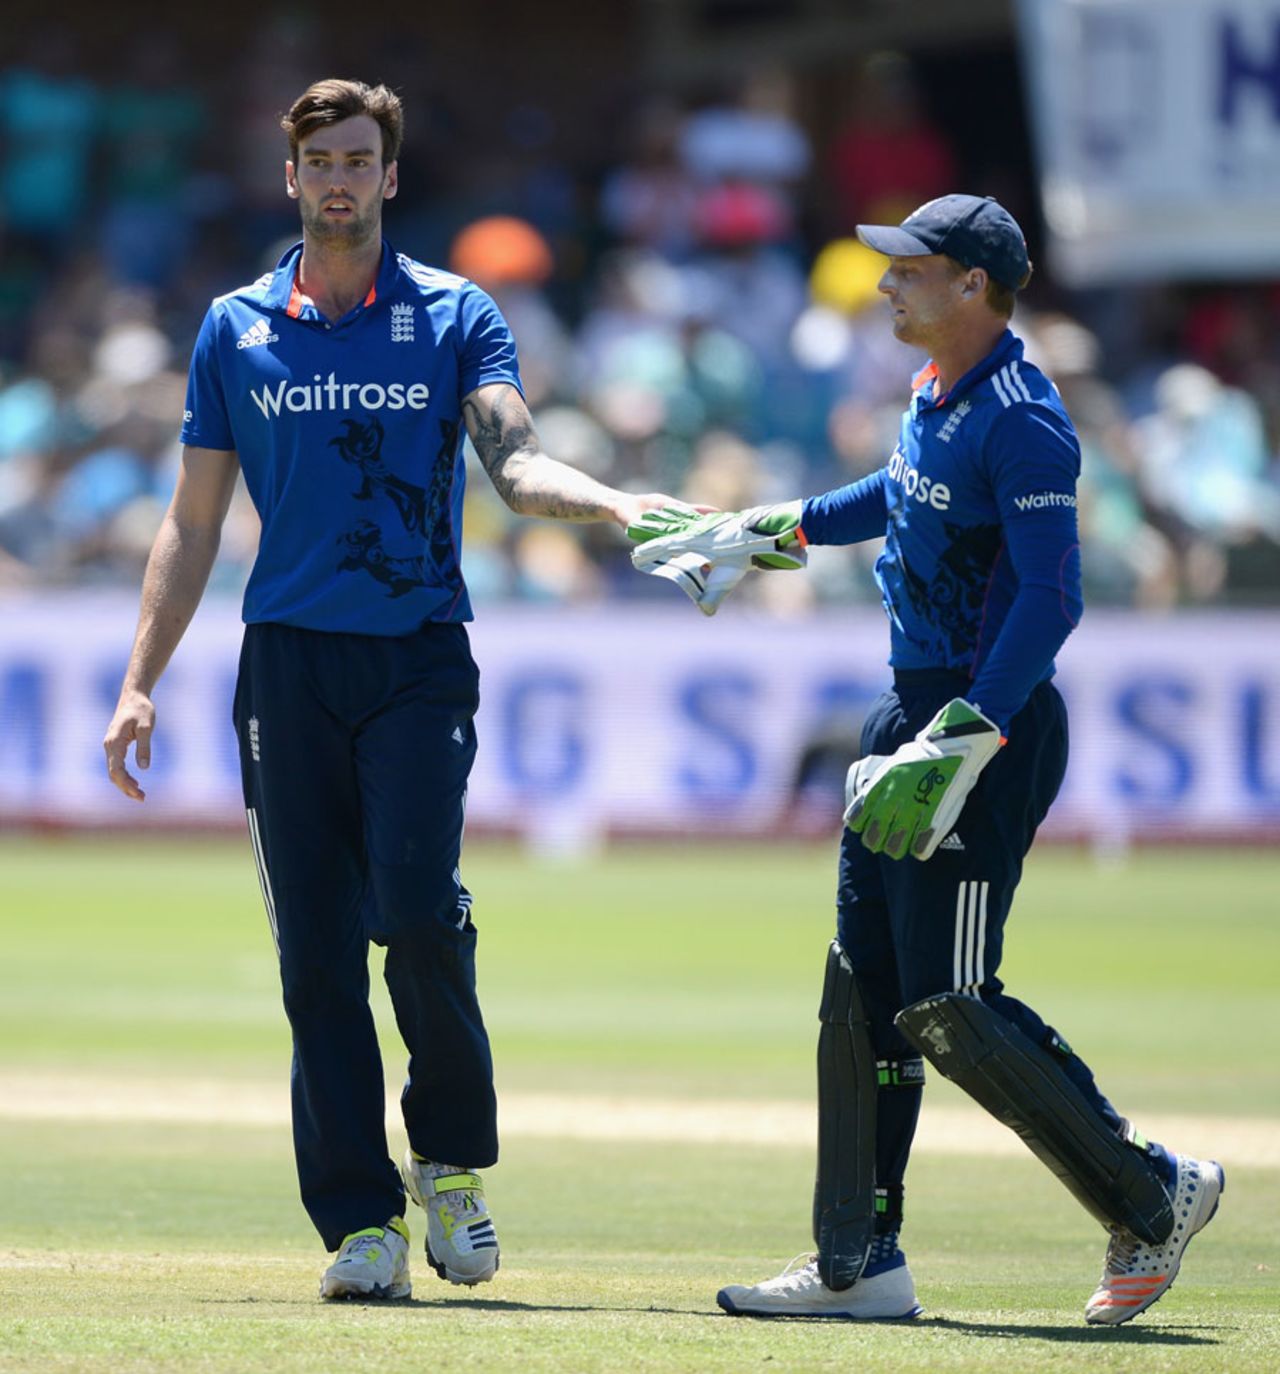 Reece Topley finished with his best ODI figures of 4 for 50, South Africa v England, 2nd ODI, Port Elizabeth, February 6, 2016